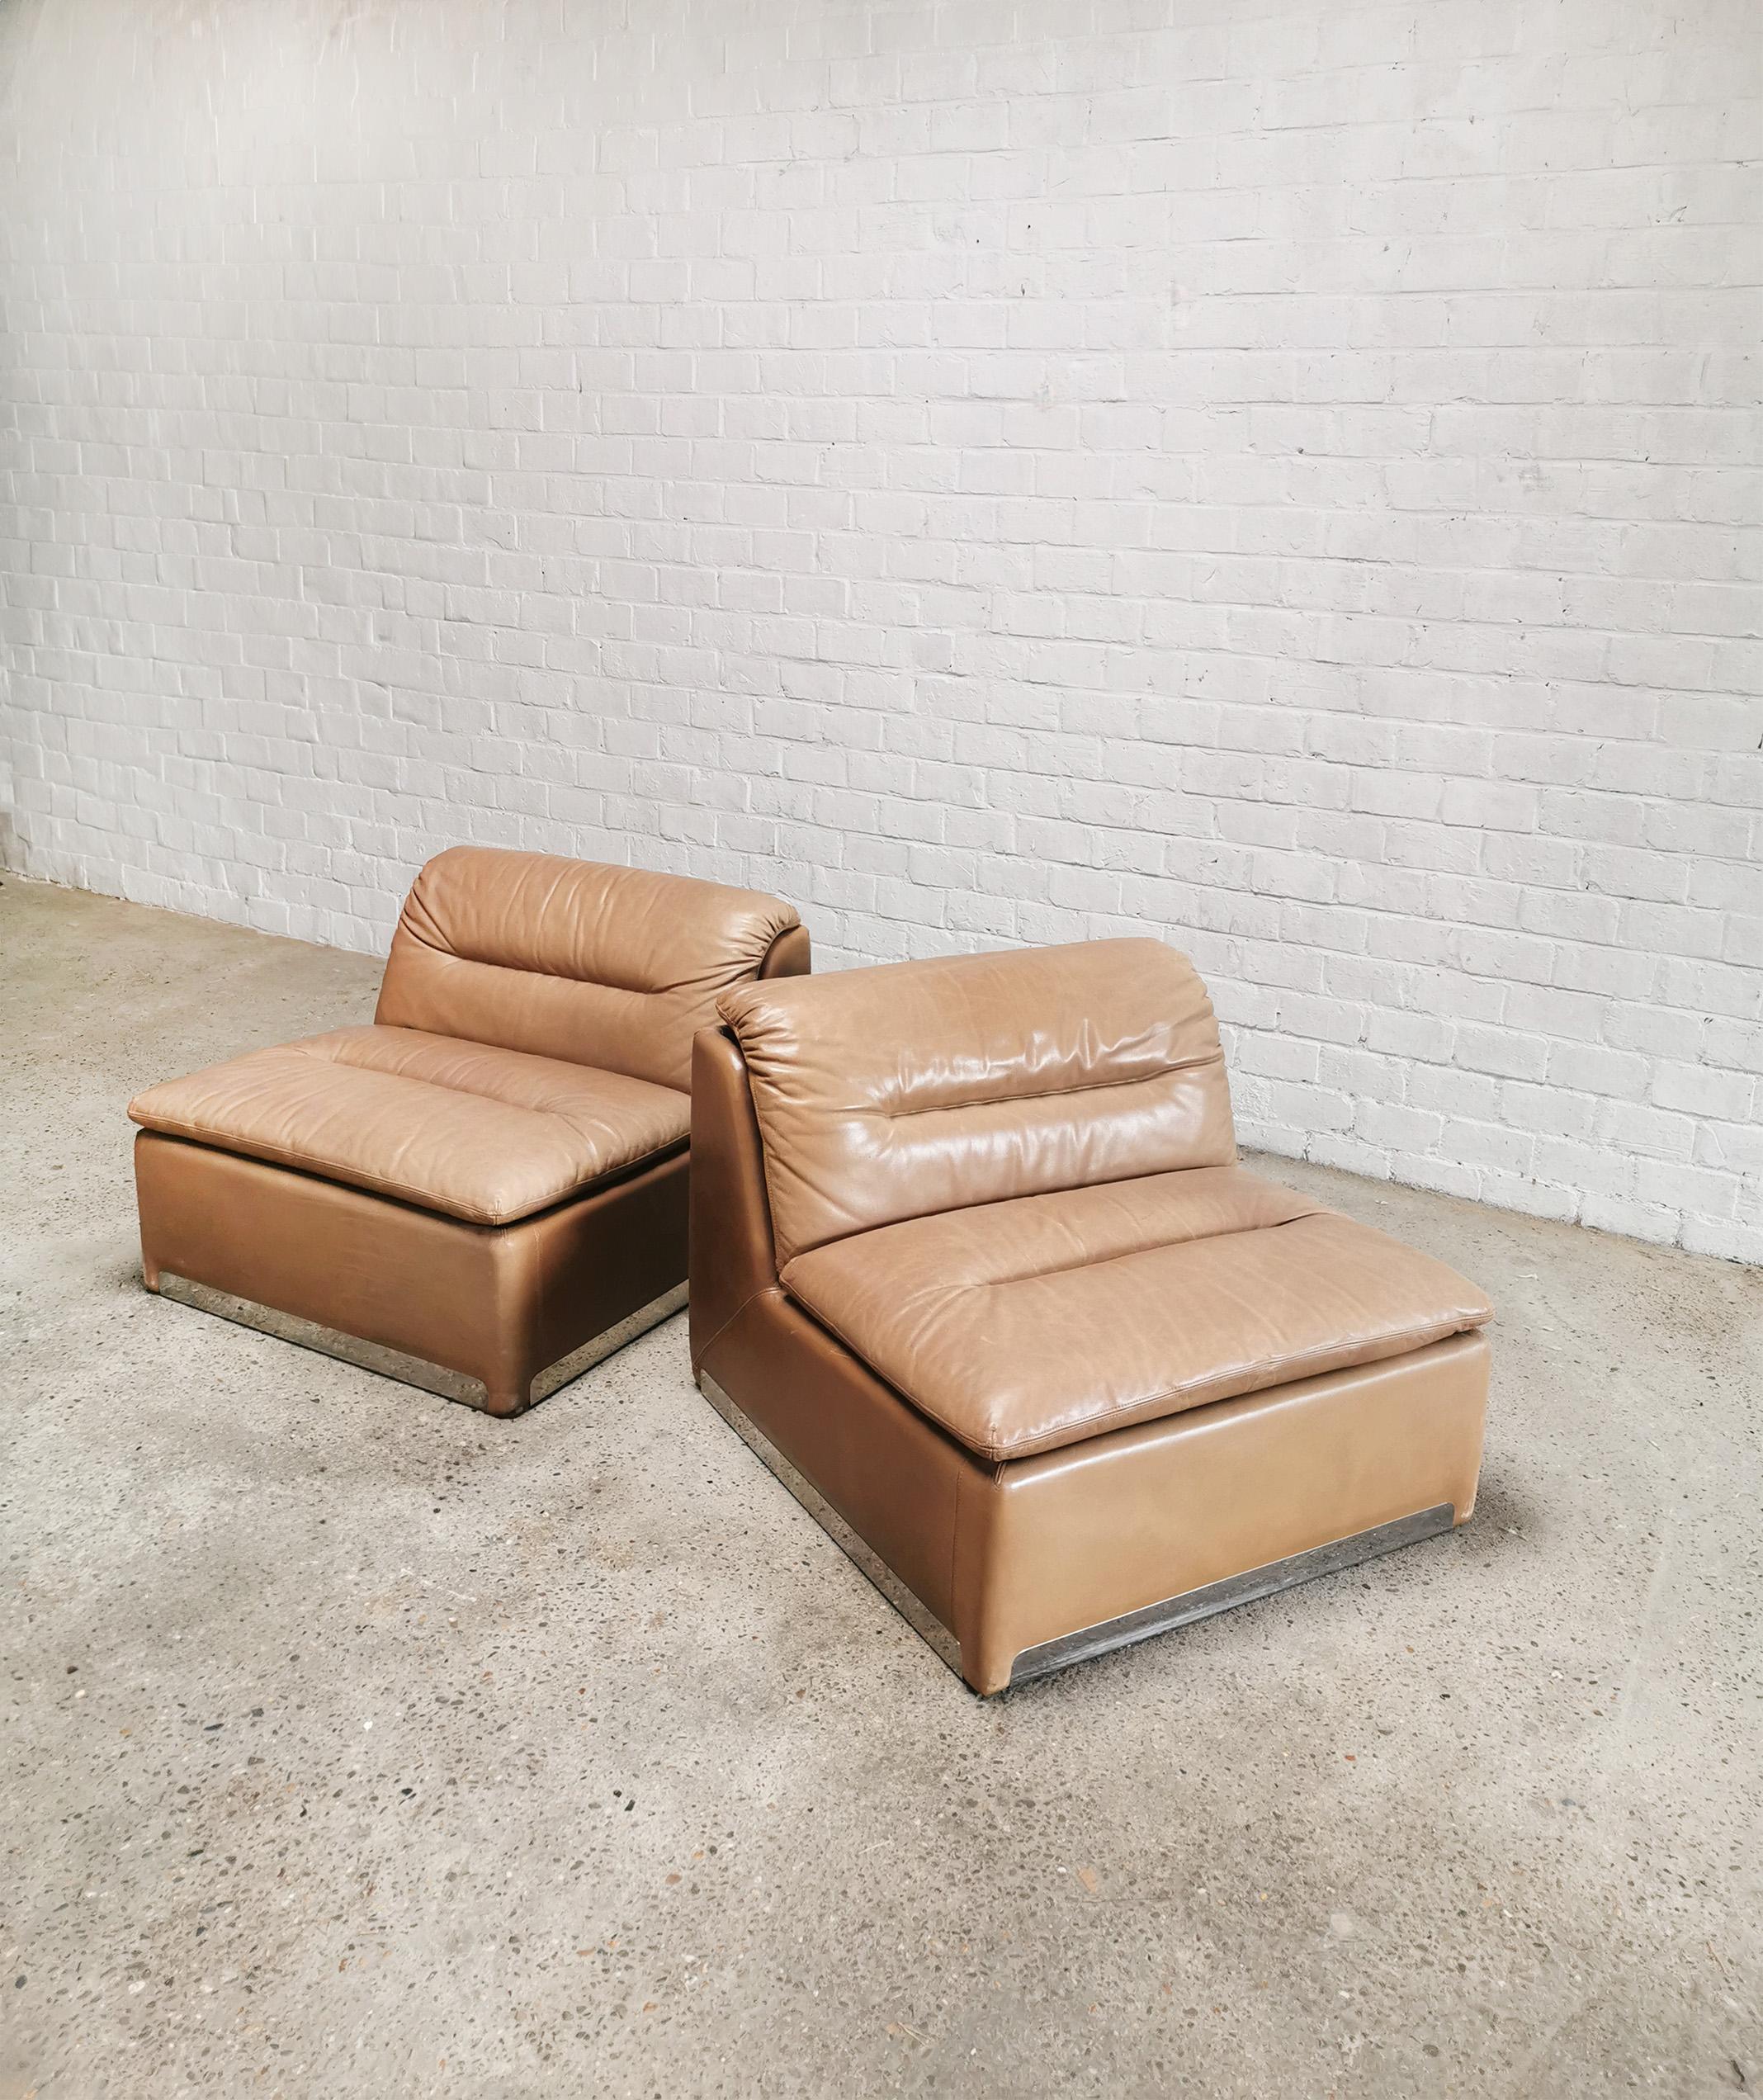 A pair of 1970's saporiti 'P10' modular lounge chairs, upholstered in the original rich cognac leather. These lounge chairs feature a heavy upholstered steel base frame, with an L shaped seat, and armless modular design. Their modernist style